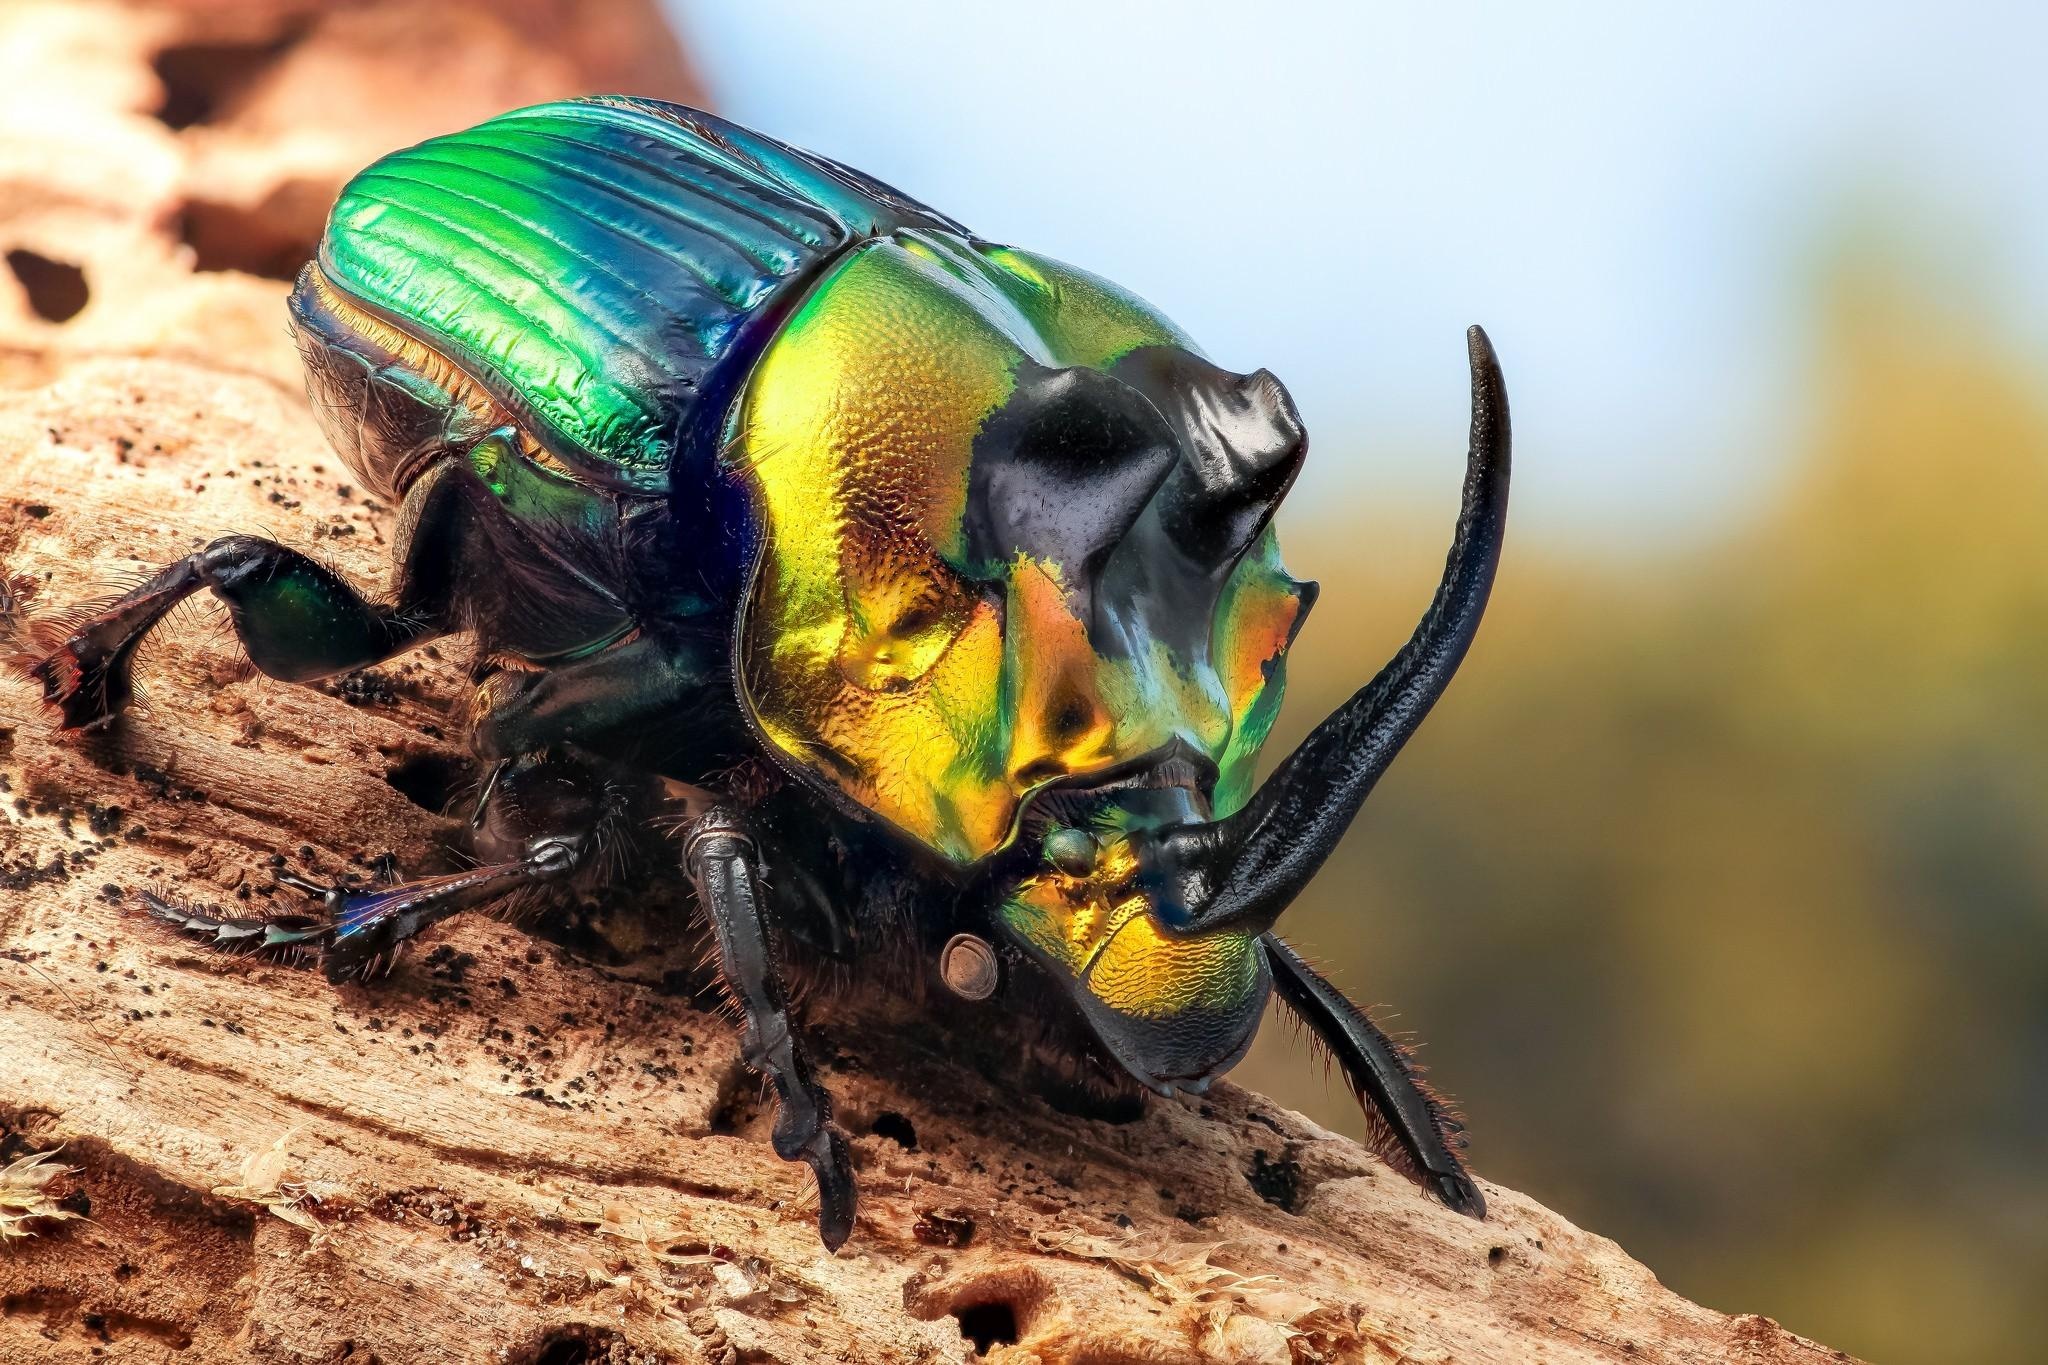 Beetle insect wallpapers, Beautiful bug close-ups, Fascinating beetle species, Insect diversity, 2050x1370 HD Desktop